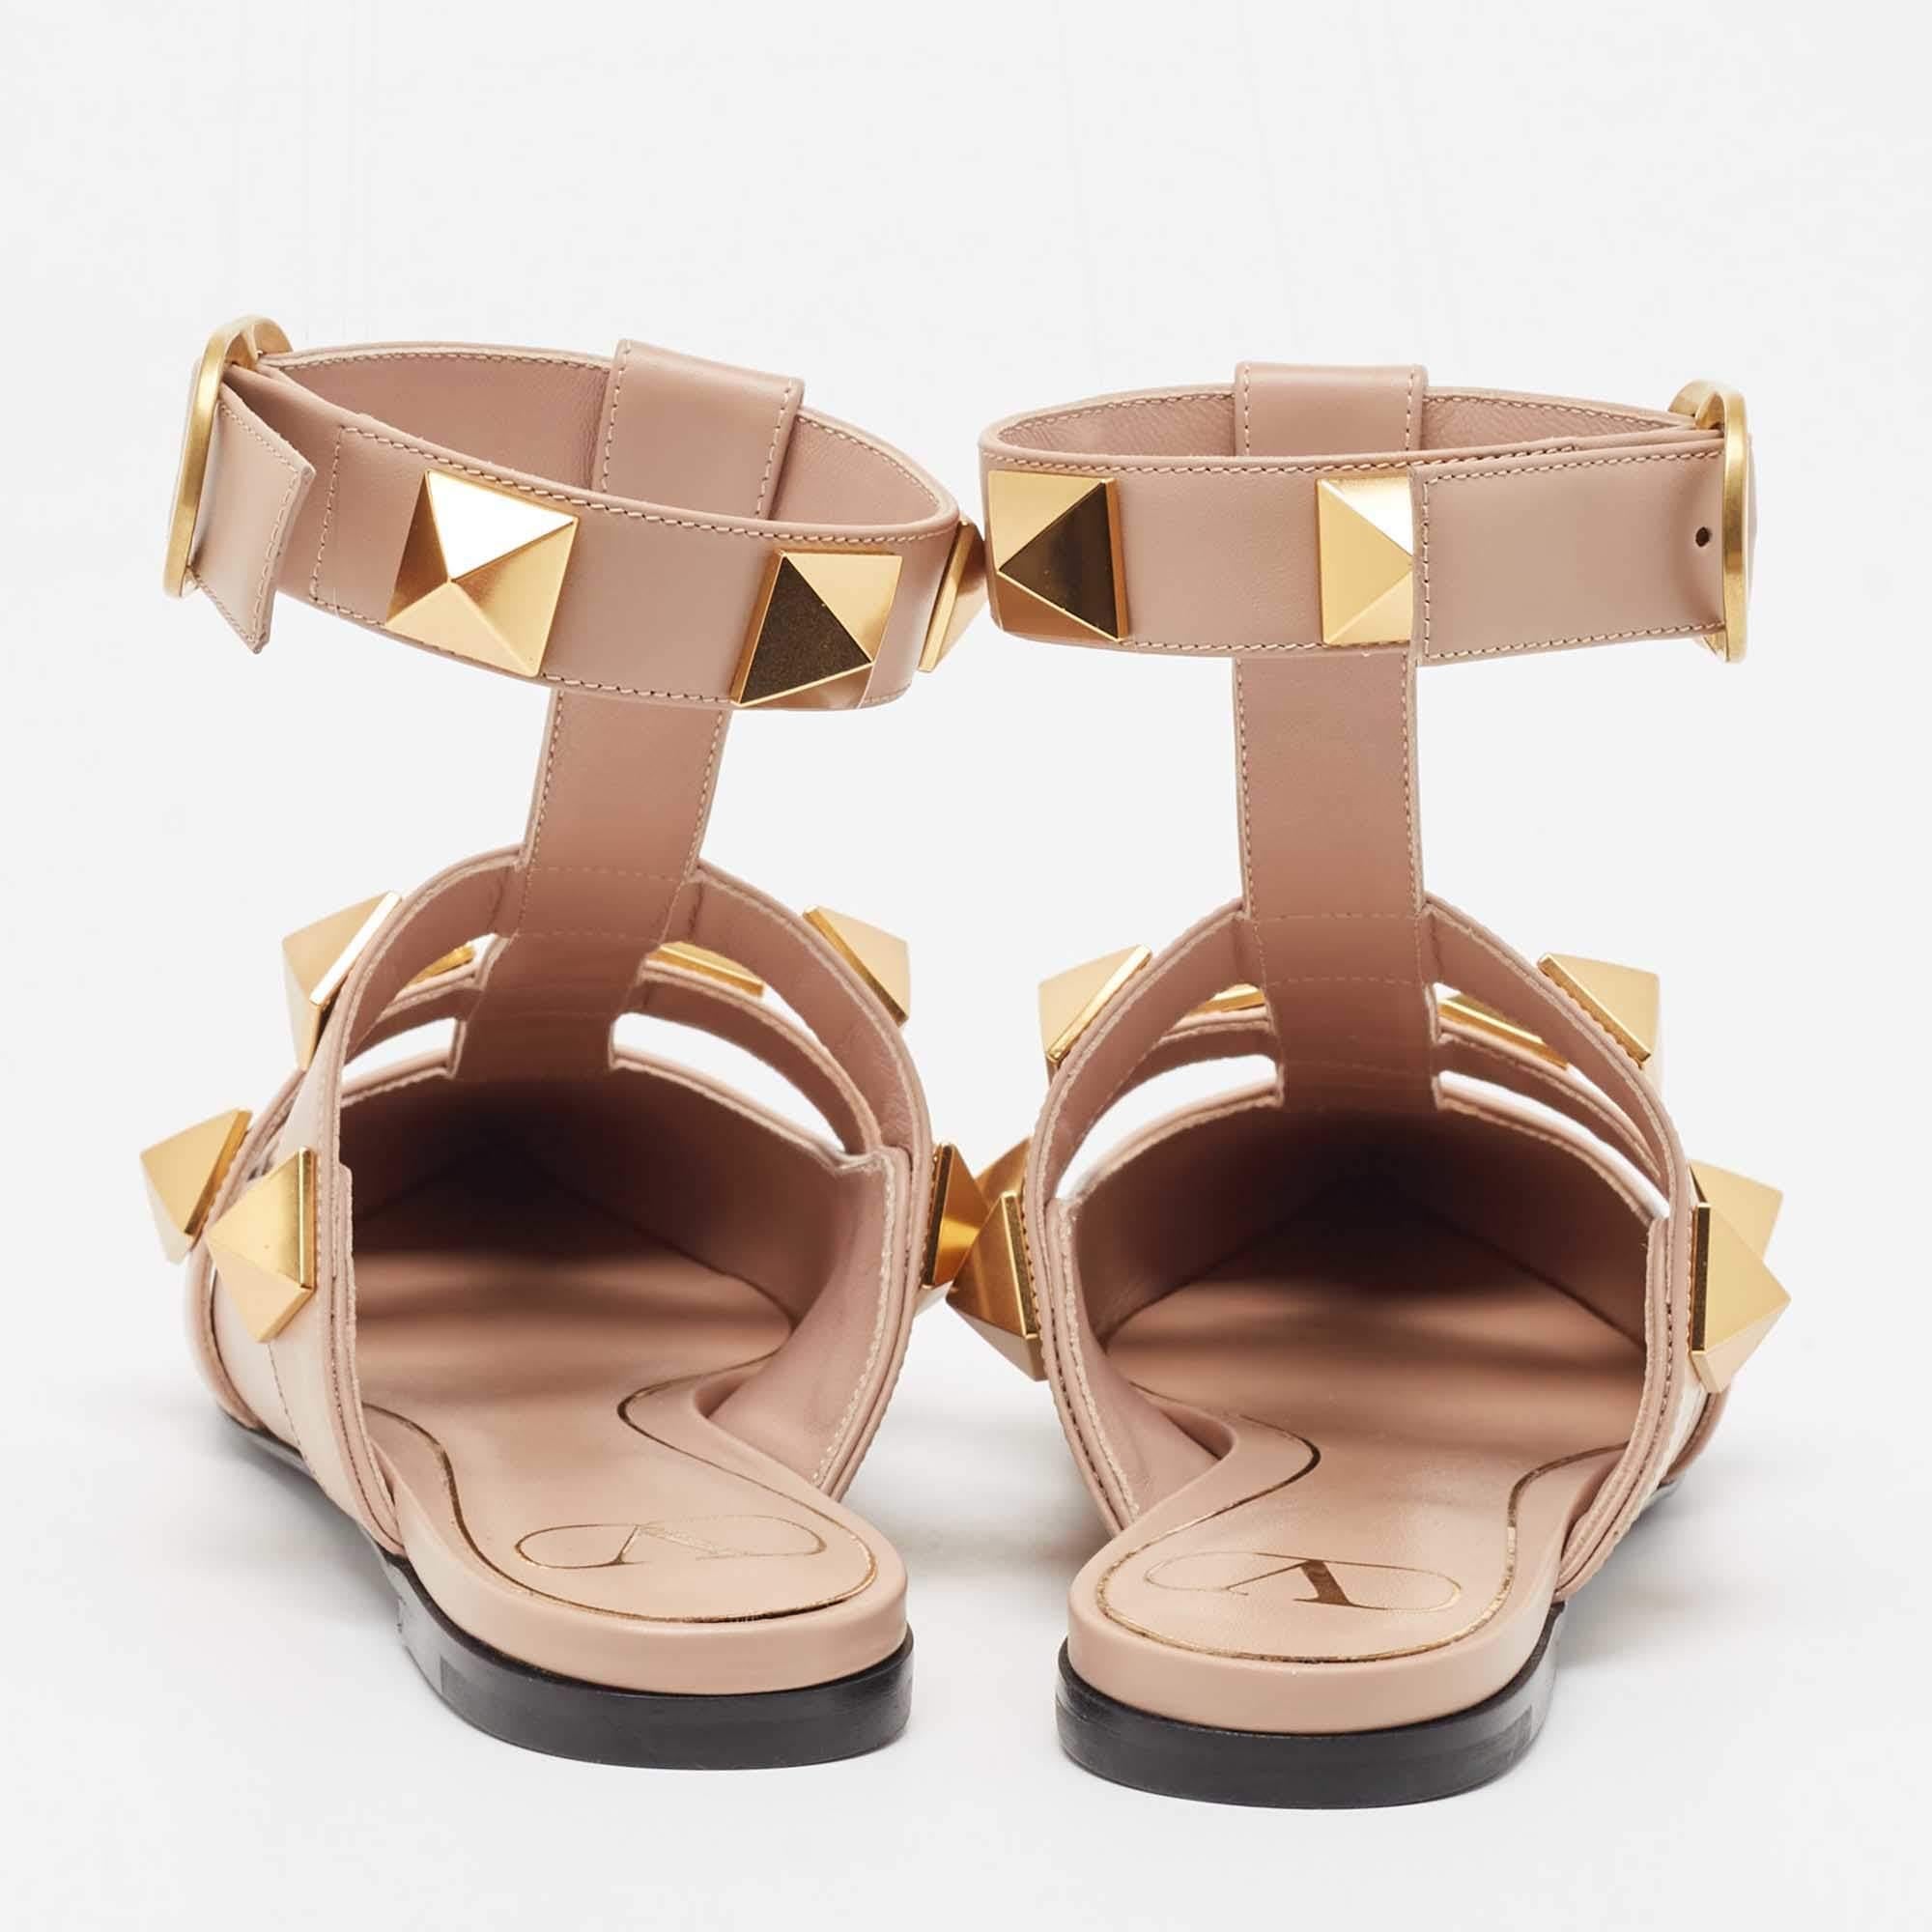 Valentino Beige Leather Roman Stud Ankle Strap Sandals Size 36 1